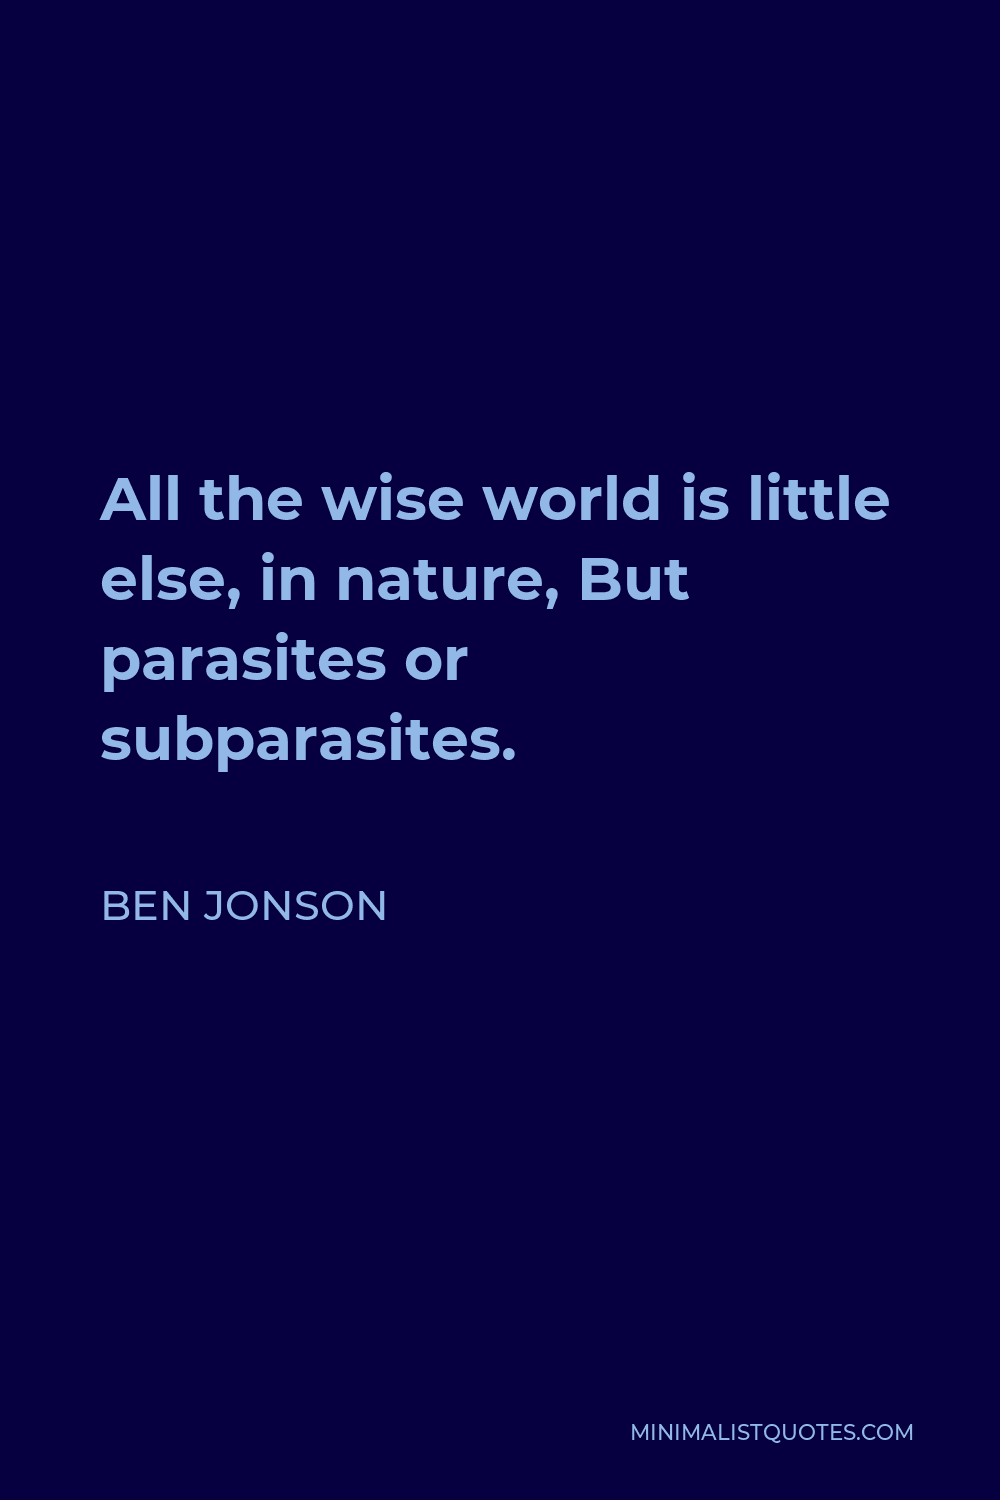 Ben Jonson Quote - All the wise world is little else, in nature, But parasites or subparasites.